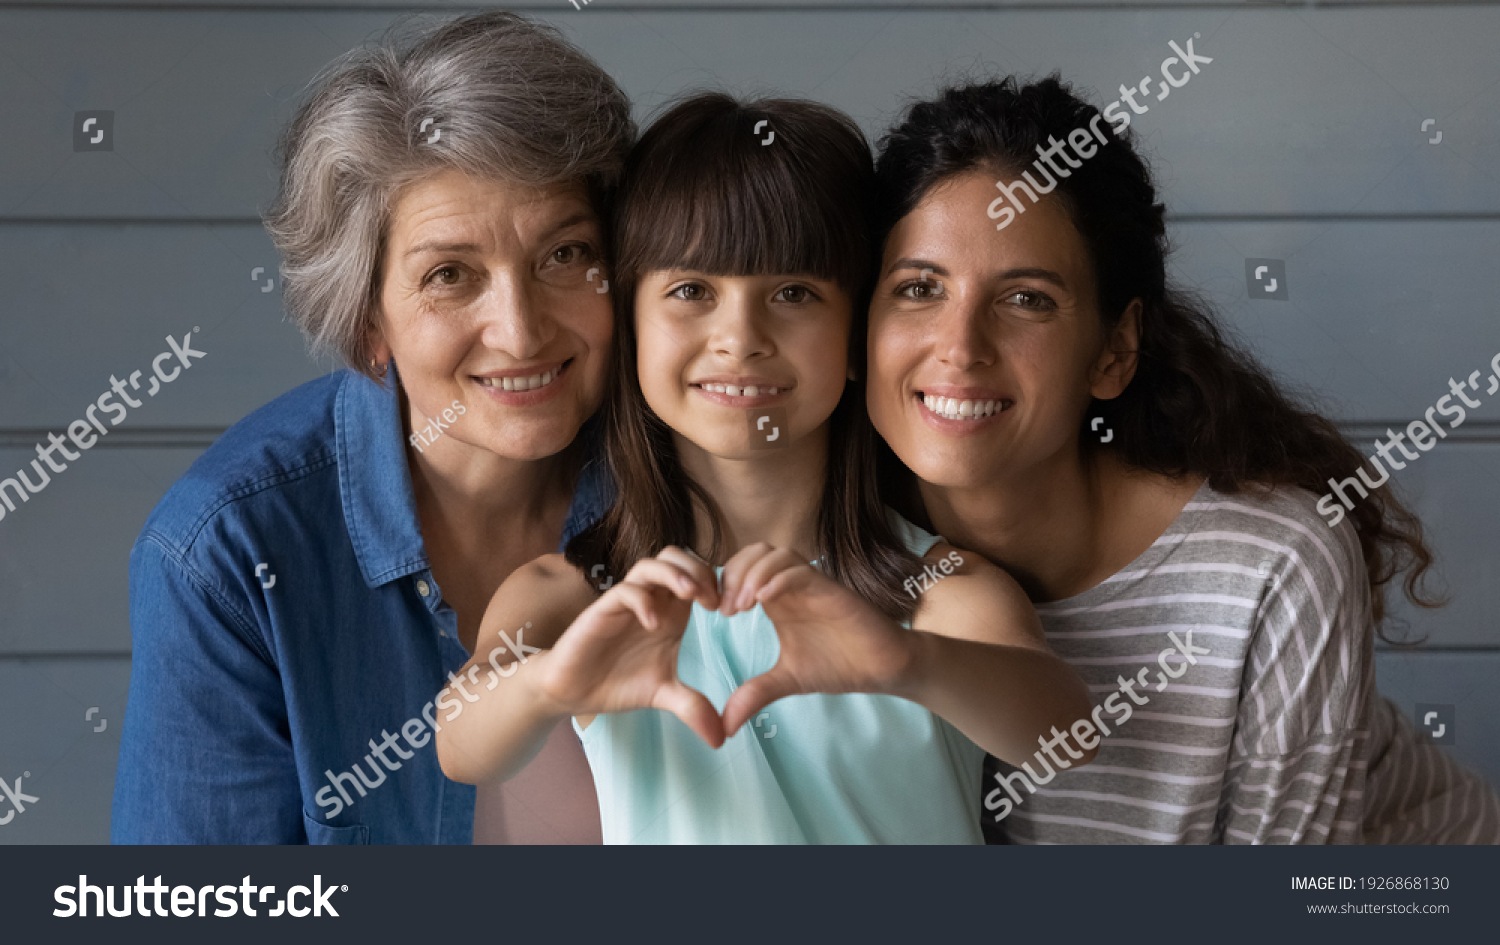 Close up family portrait of happy three generations of Hispanic women pose together show love heart hand gesture. Smiling little Latino girl child with young mother and senior grandmother feel united. #1926868130